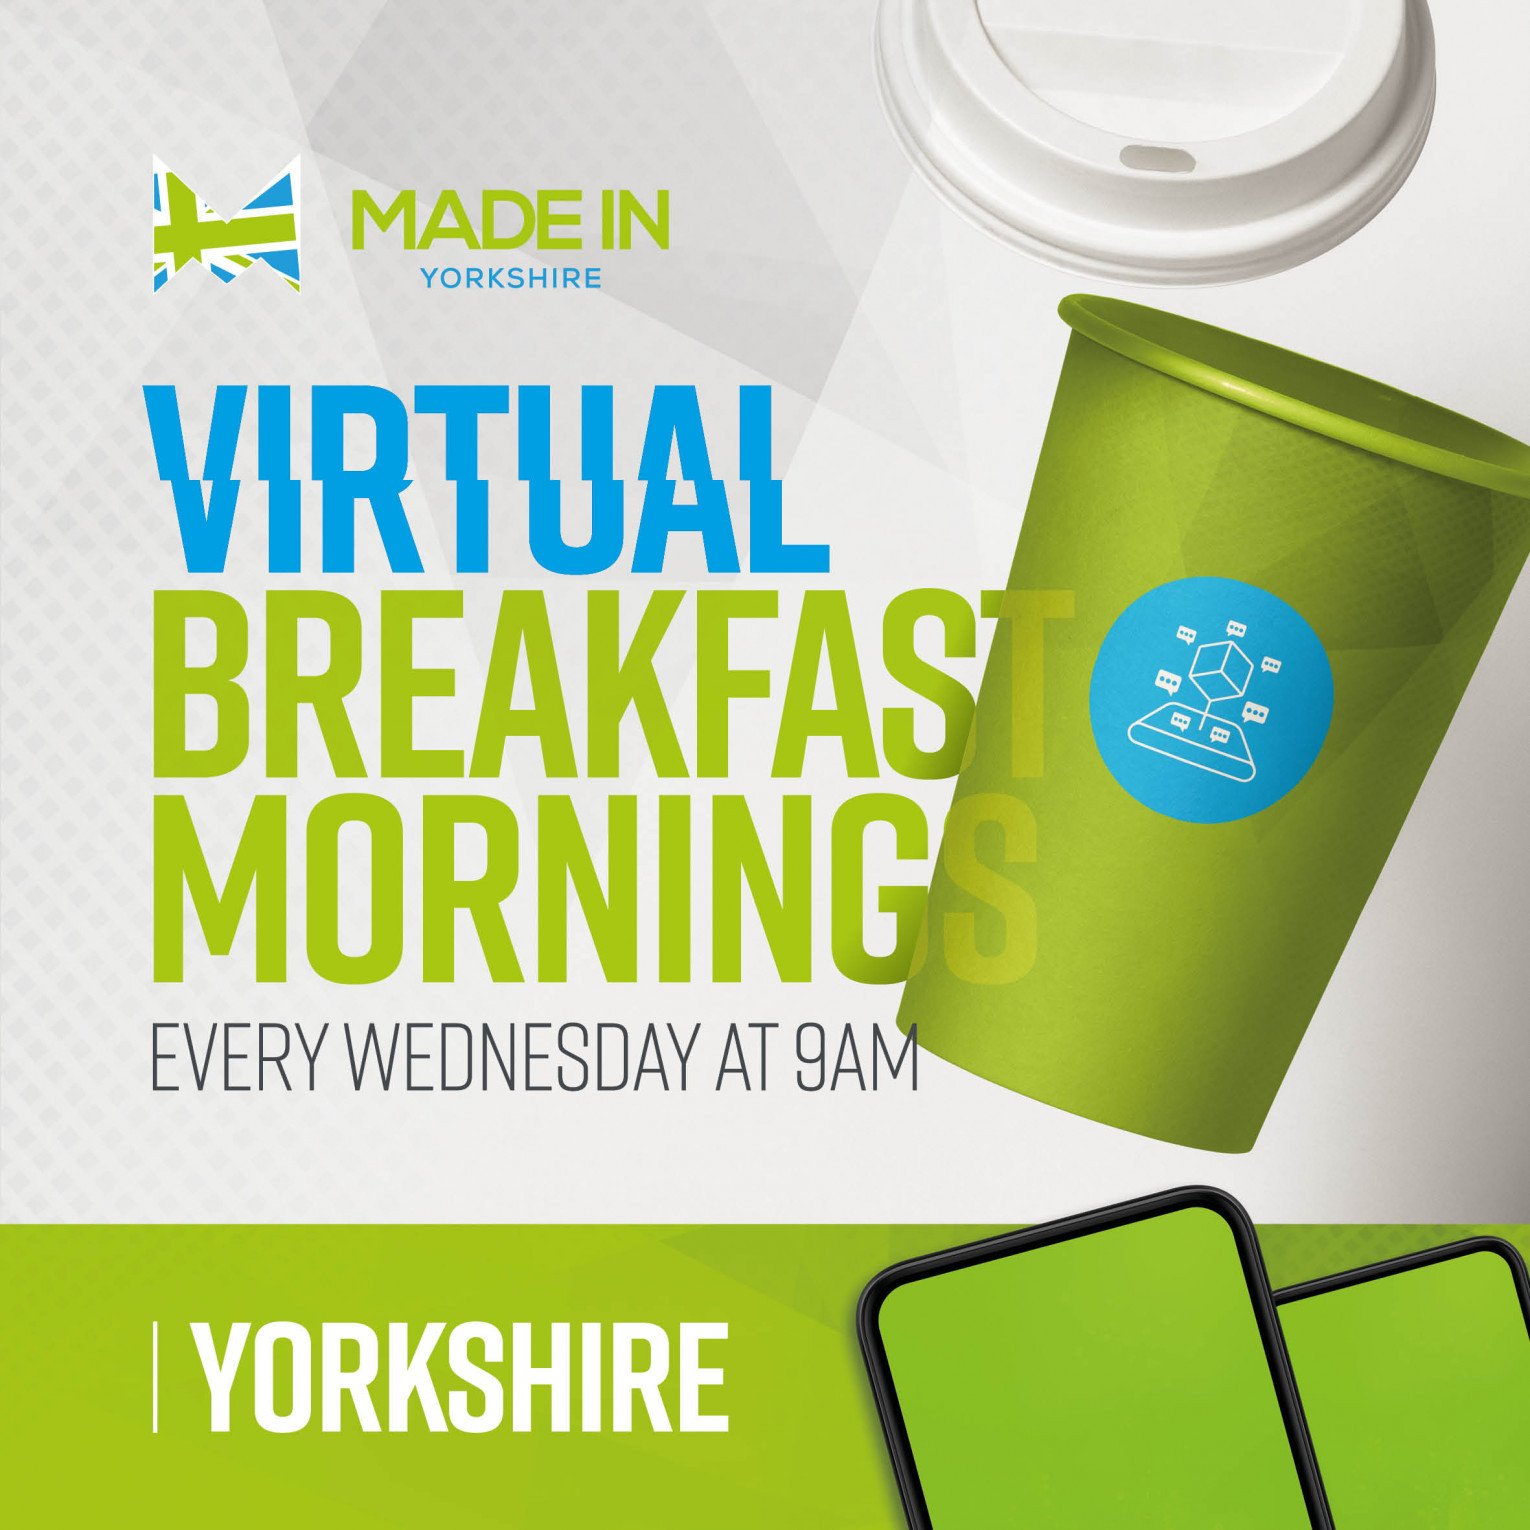 Made in Yorkshire Virtual Breakfast Morning with ROCOL